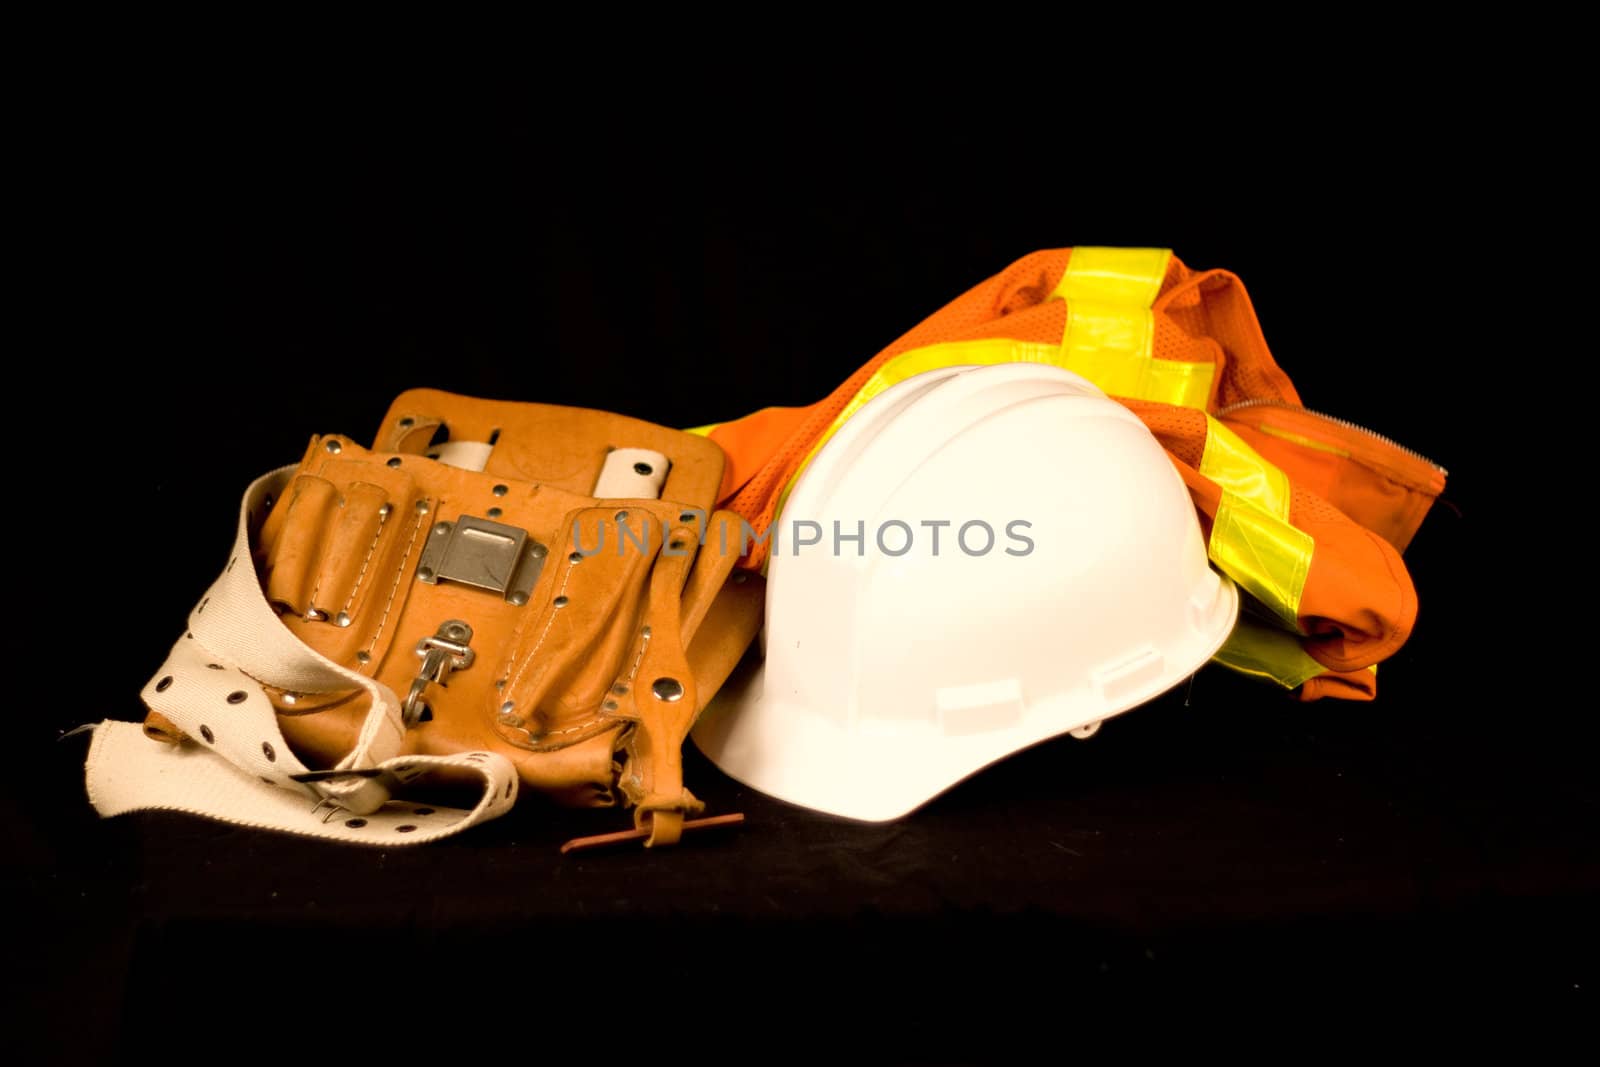 Tool Belt Construction Hard Hat Reflective Safety Vest isolated on a Black Background.